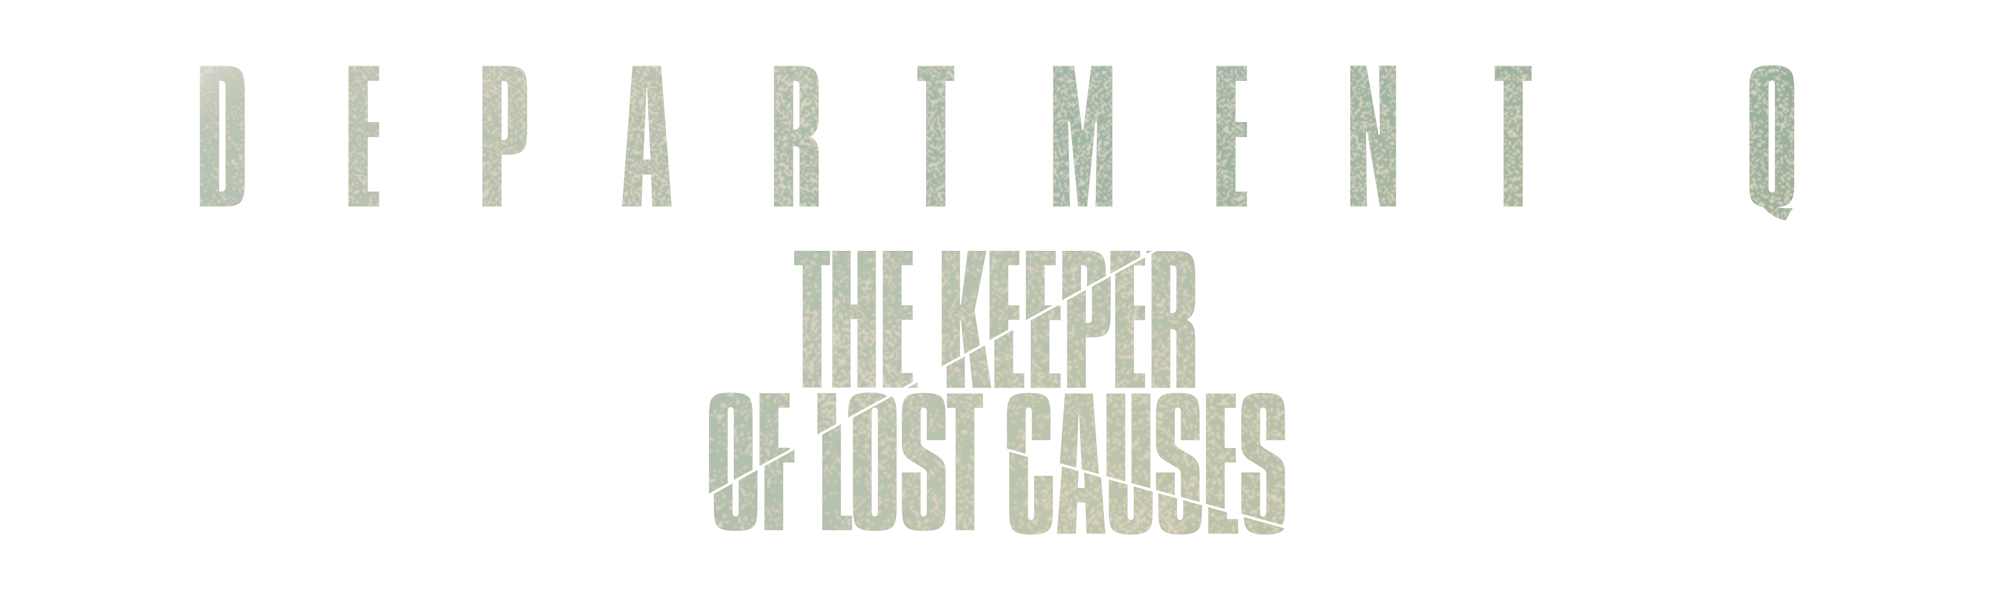 Dept. Q: The Keeper of Lost Causes (Part 1)